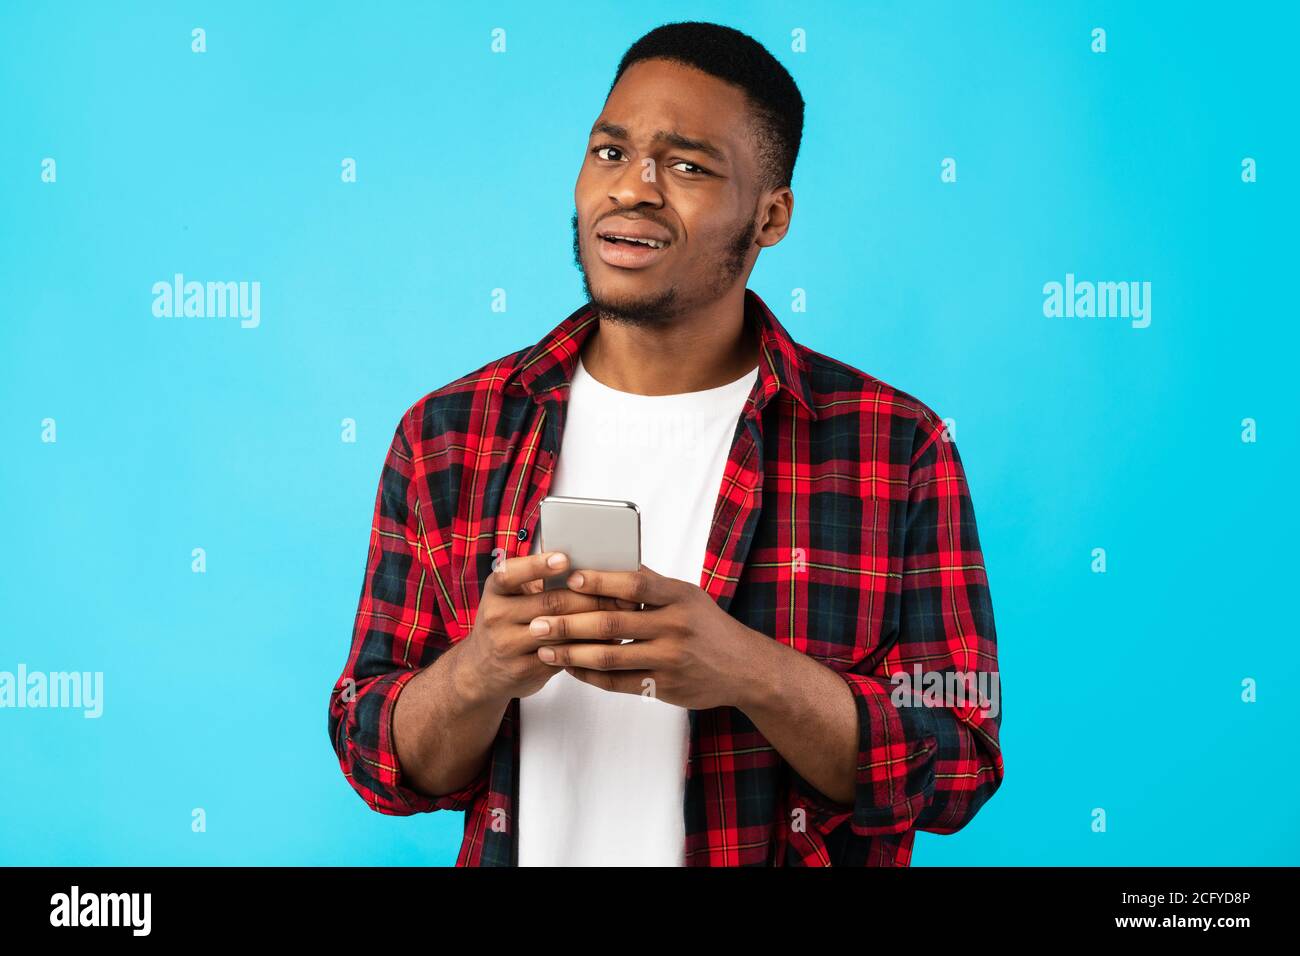 Unsure Black Man Holding Cellphone Posing Over Blue Background Stock Photo